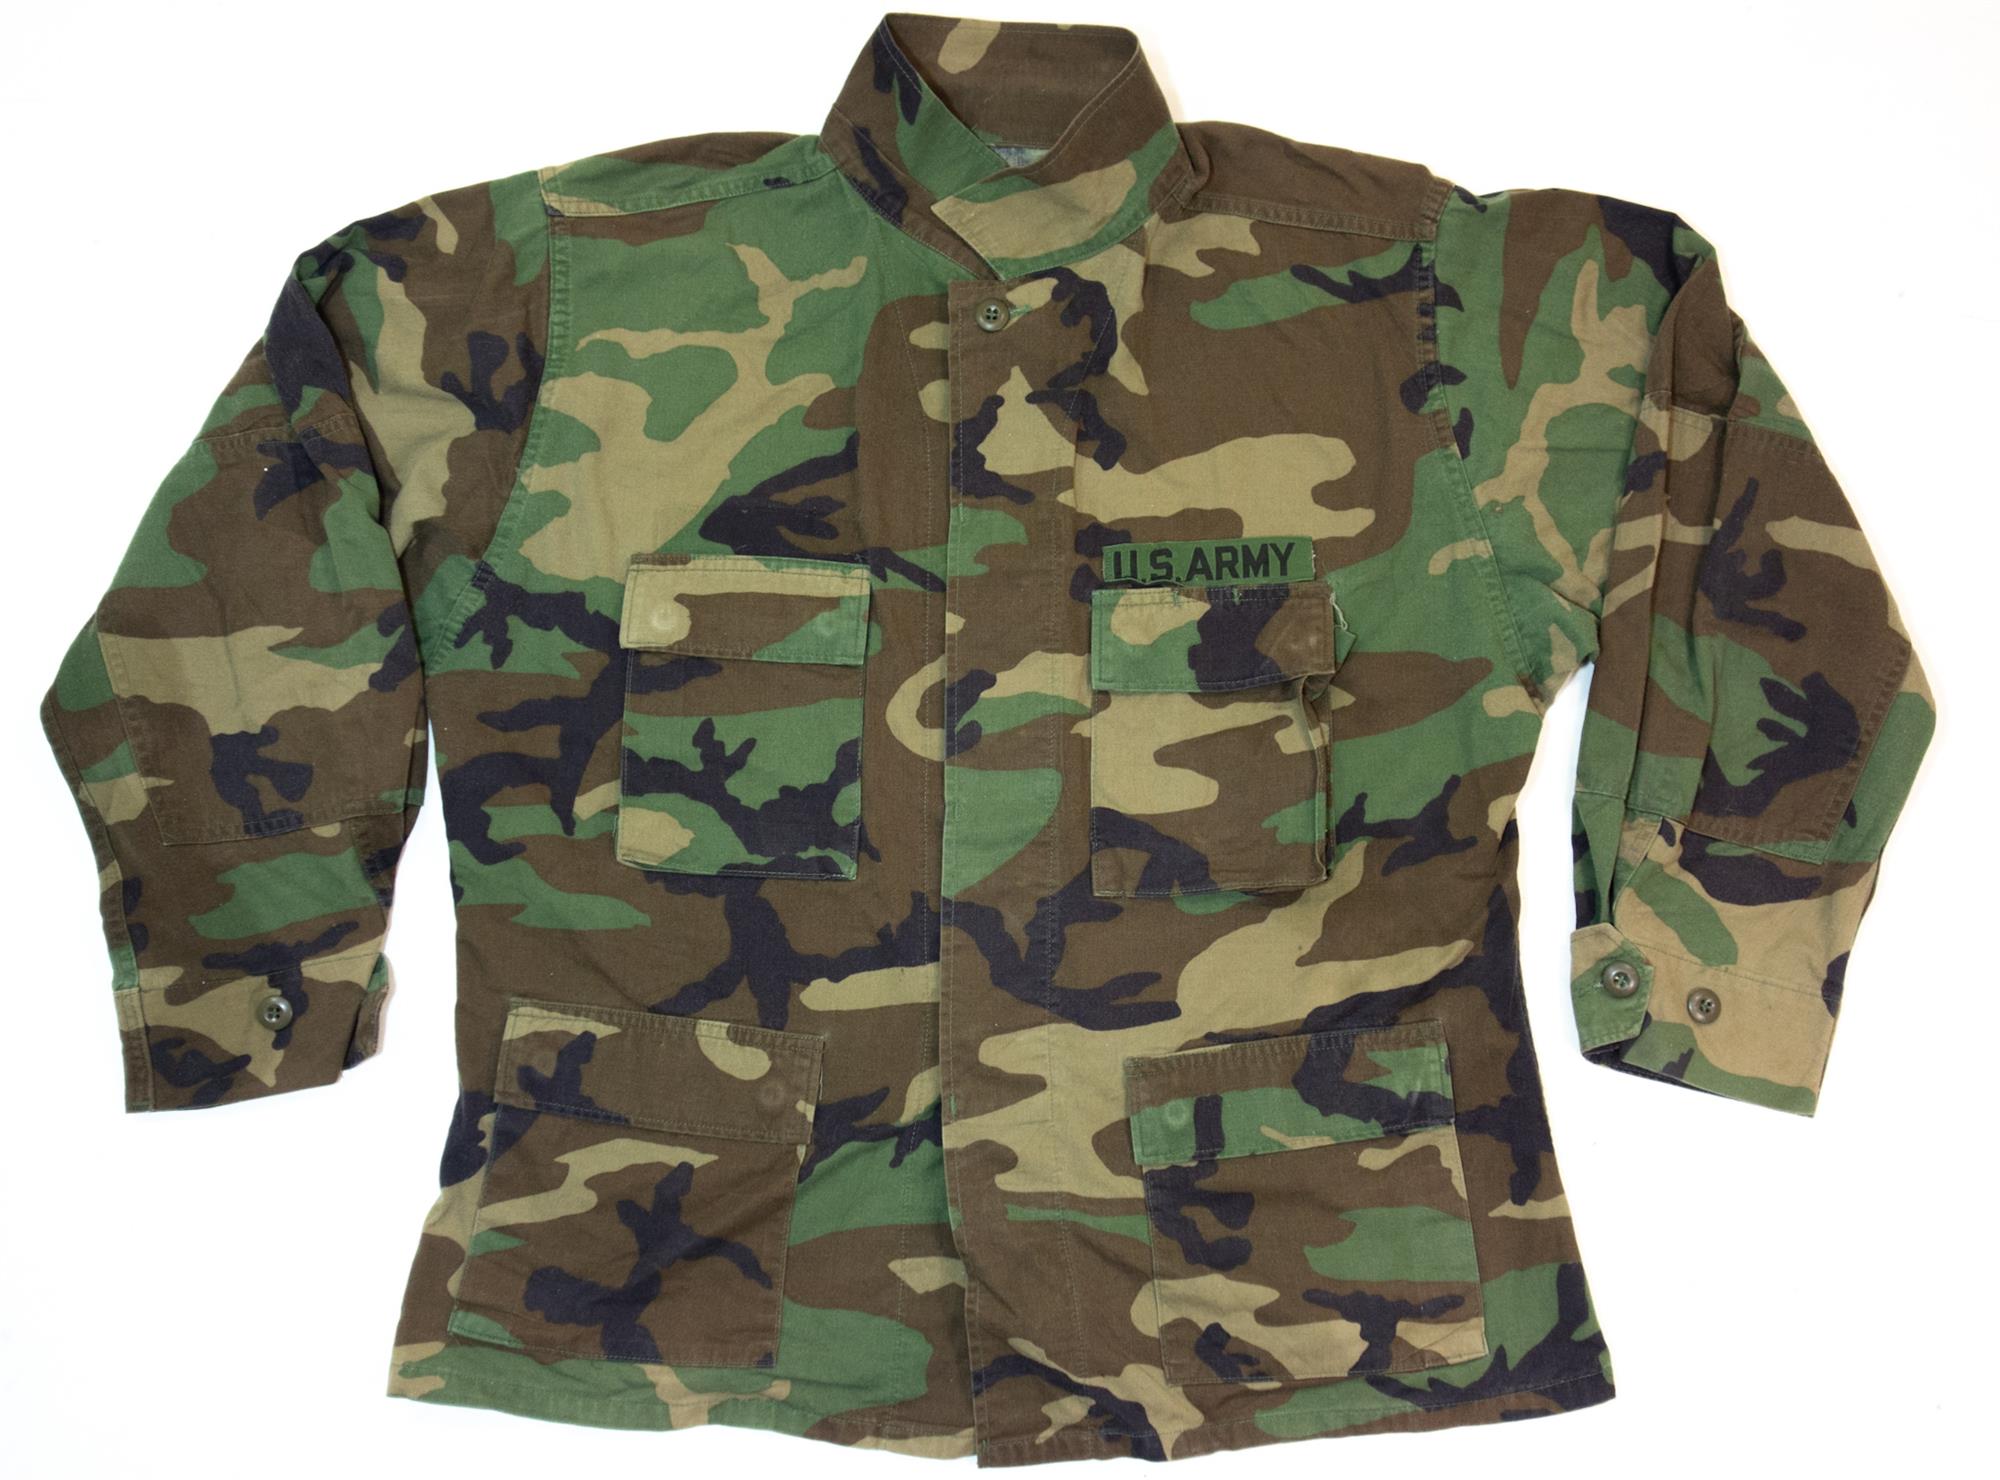 US army military M81 woodland camouflage bdu field shirt ripstop.